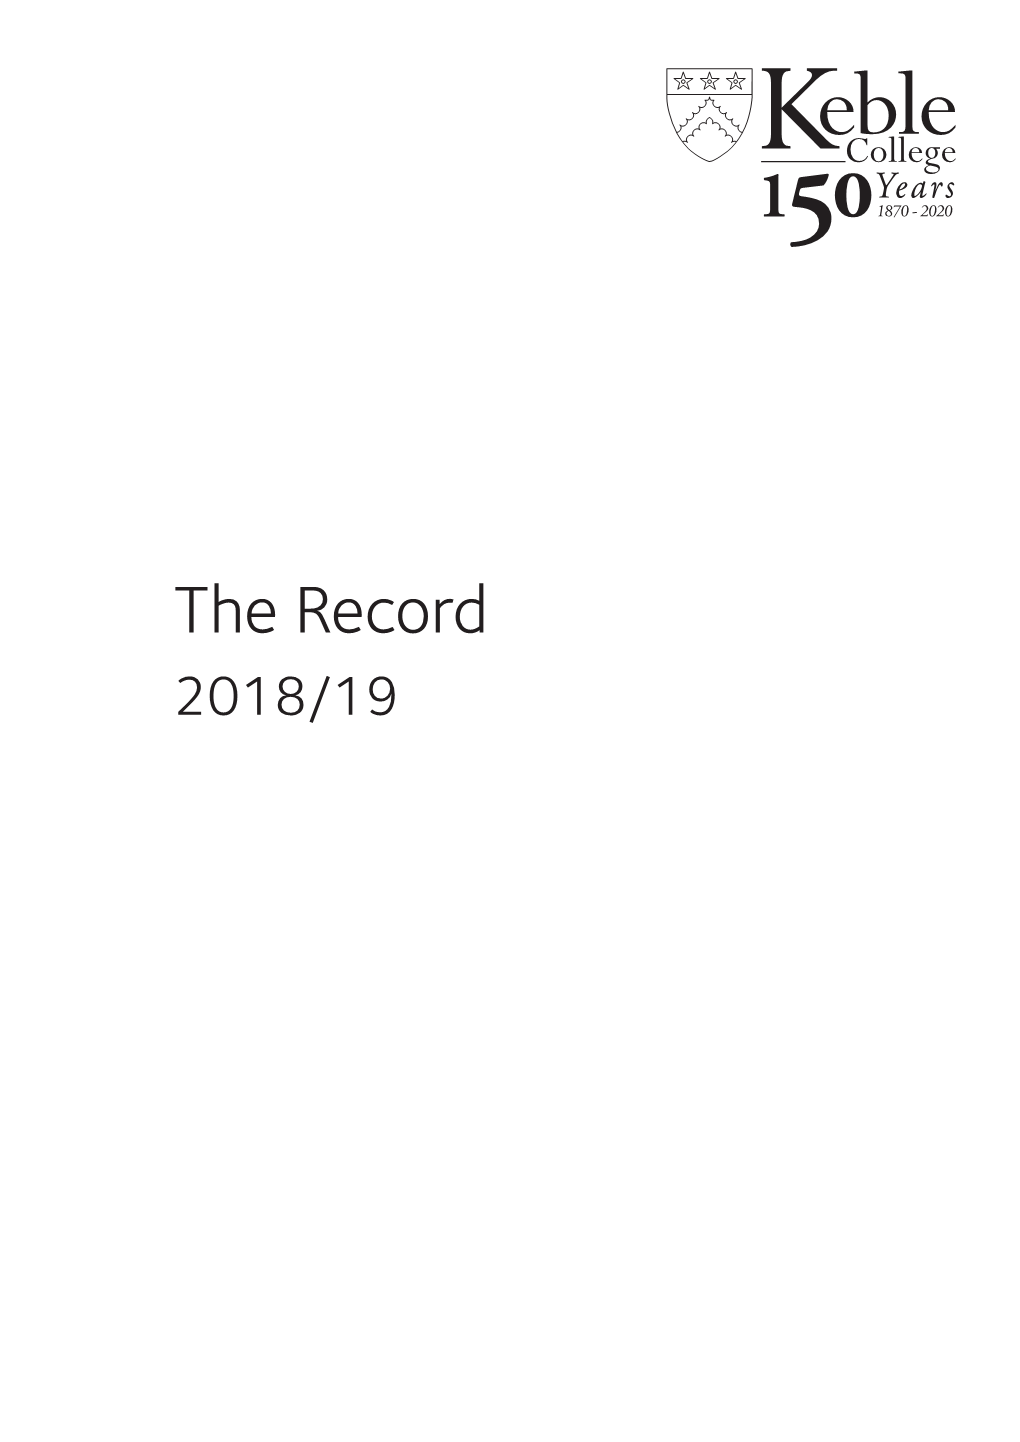 The Record 2018/19